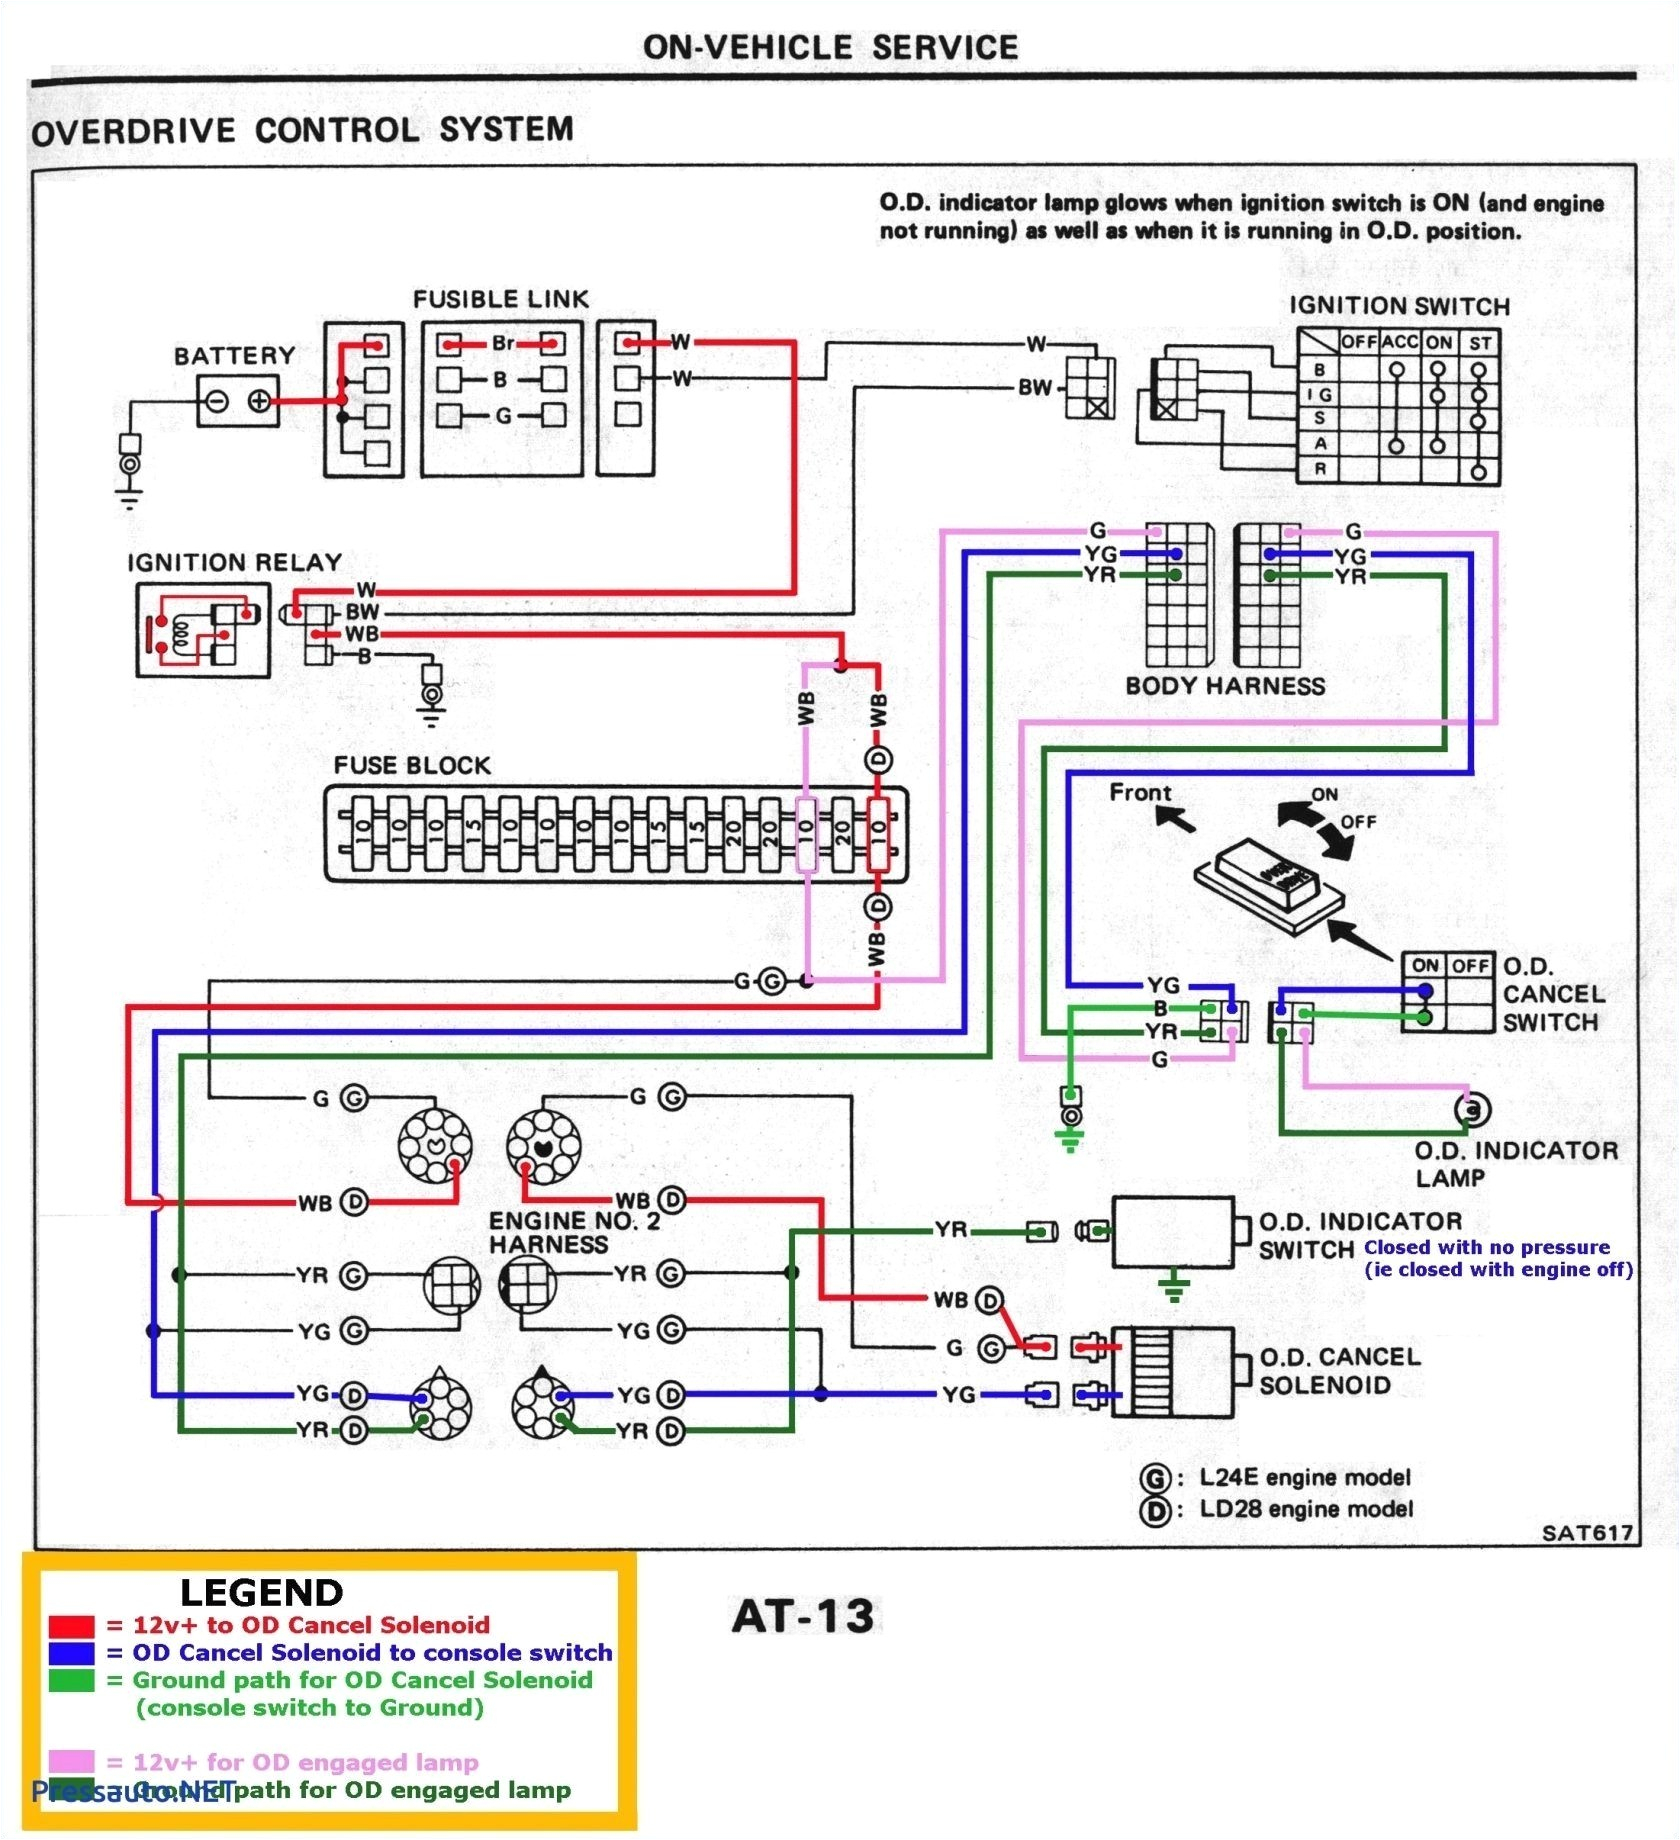 comcast home wiring diagram valid cat5 wiring for a house wire data of comcast home wiring diagram on best comcast home wiring diagram png